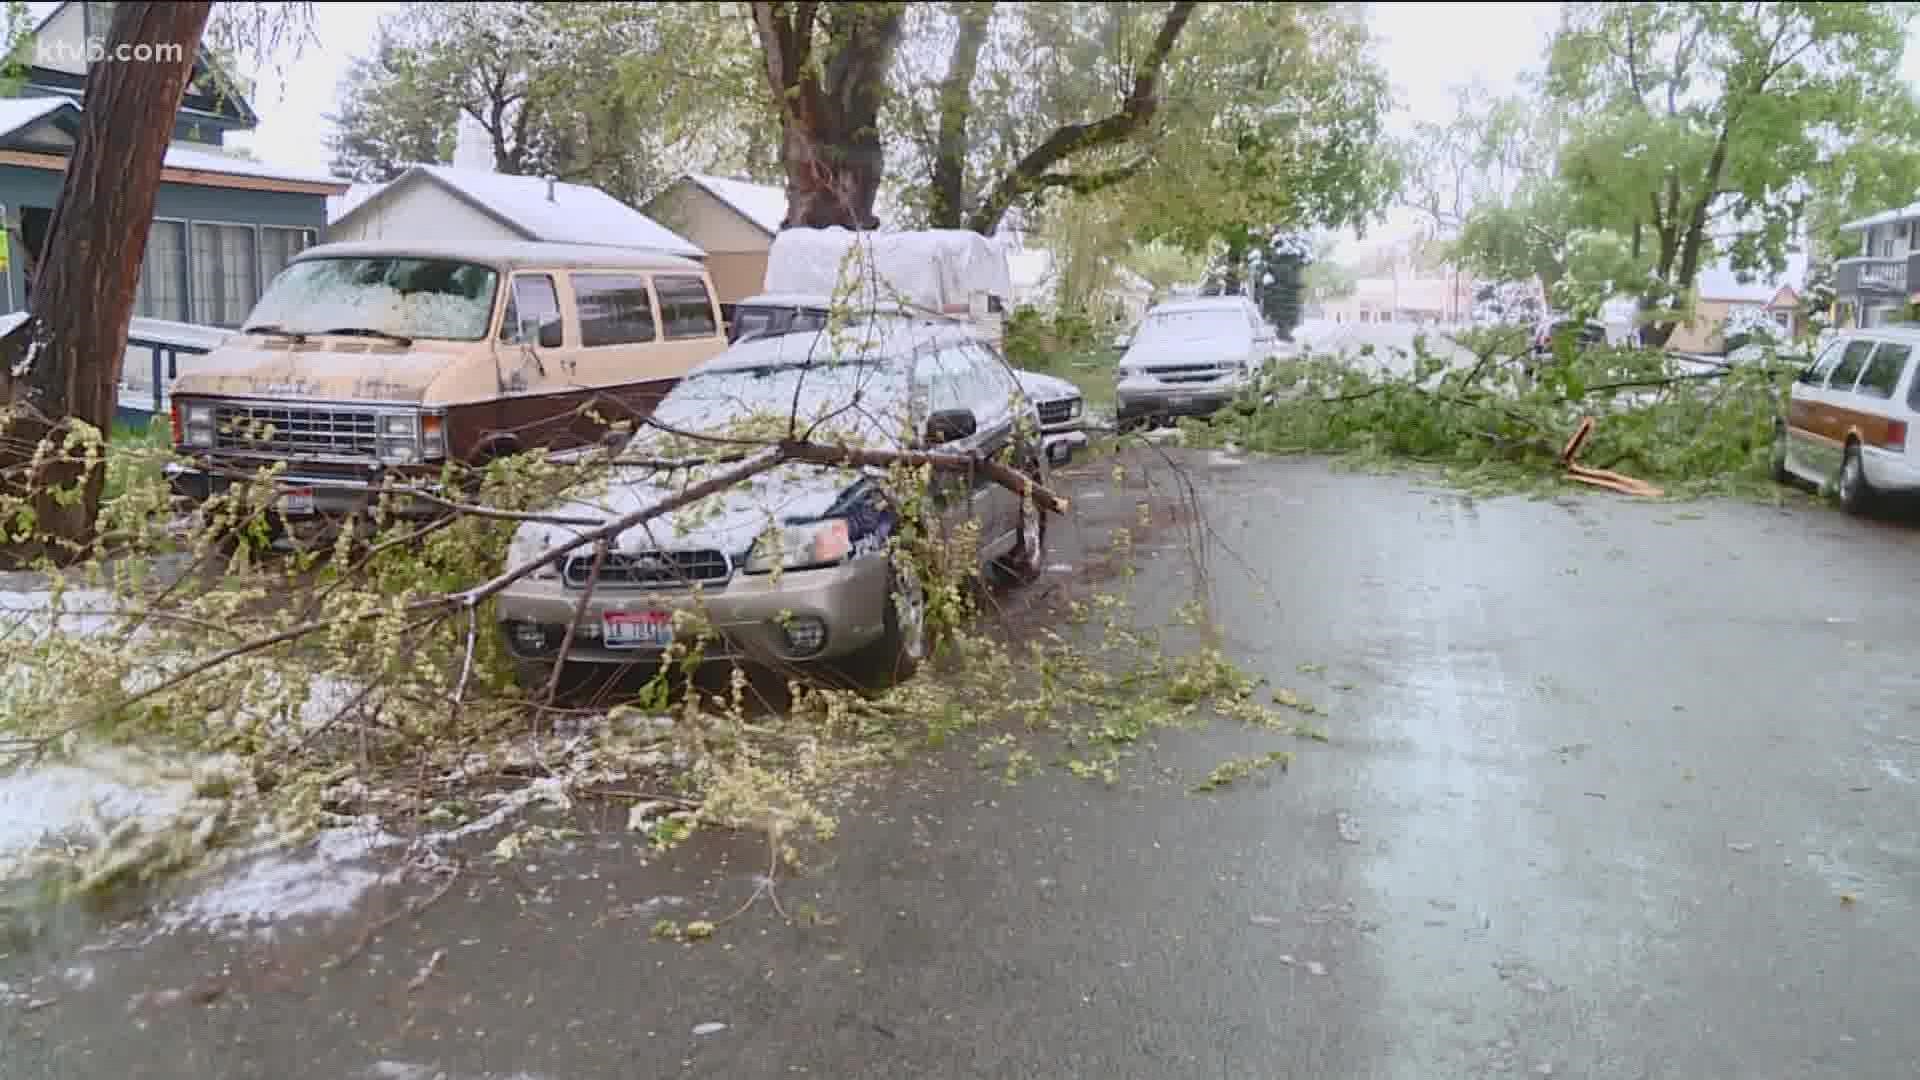 A late-season snowstorm created slick conditions and knocked down branches and trees in some neighborhoods Monday.